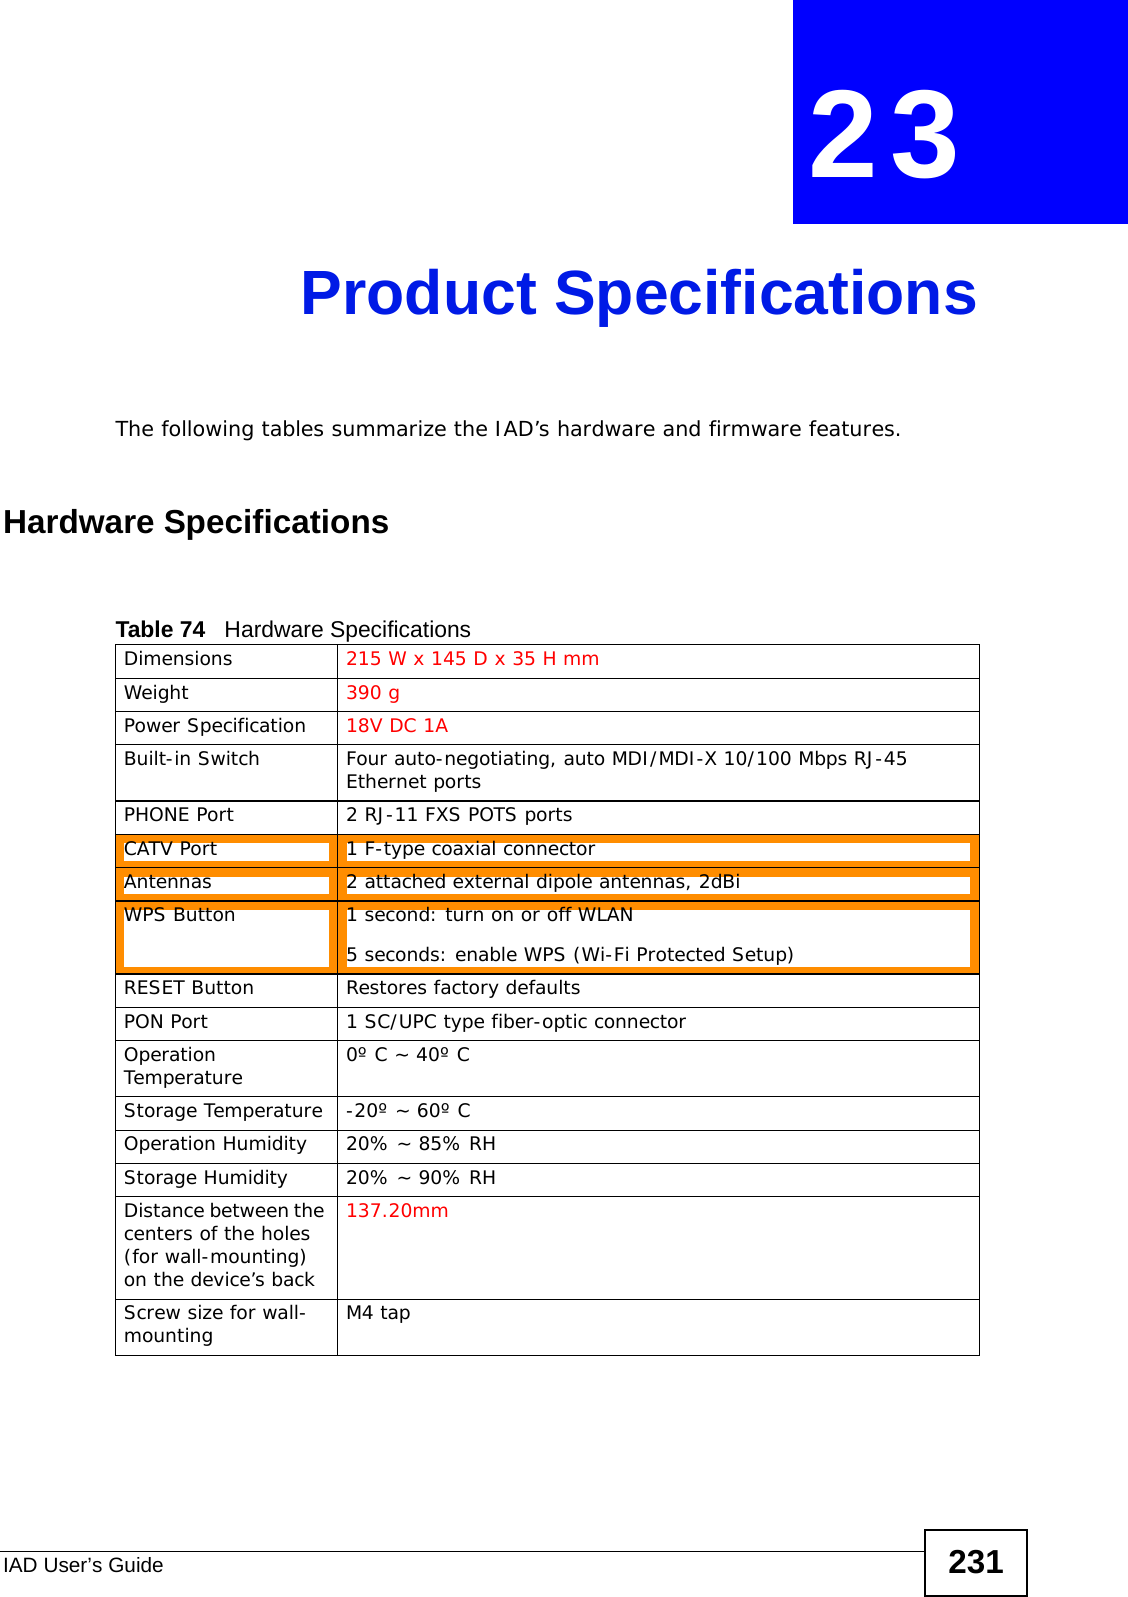 IAD User’s Guide 231CHAPTER  23 Product SpecificationsThe following tables summarize the IAD’s hardware and firmware features.Hardware SpecificationsTable 74   Hardware SpecificationsDimensions 215 W x 145 D x 35 H mmWeight 390 gPower Specification 18V DC 1ABuilt-in Switch Four auto-negotiating, auto MDI/MDI-X 10/100 Mbps RJ-45 Ethernet portsPHONE Port 2 RJ-11 FXS POTS portsCATV Port 1 F-type coaxial connector Antennas 2 attached external dipole antennas, 2dBiWPS Button  1 second: turn on or off WLAN5 seconds: enable WPS (Wi-Fi Protected Setup)RESET Button Restores factory defaultsPON Port 1 SC/UPC type fiber-optic connectorOperation Temperature 0º C ~ 40º CStorage Temperature -20º ~ 60º COperation Humidity 20% ~ 85% RHStorage Humidity 20% ~ 90% RHDistance between the centers of the holes (for wall-mounting) on the device’s back137.20mmScrew size for wall-mounting M4 tap